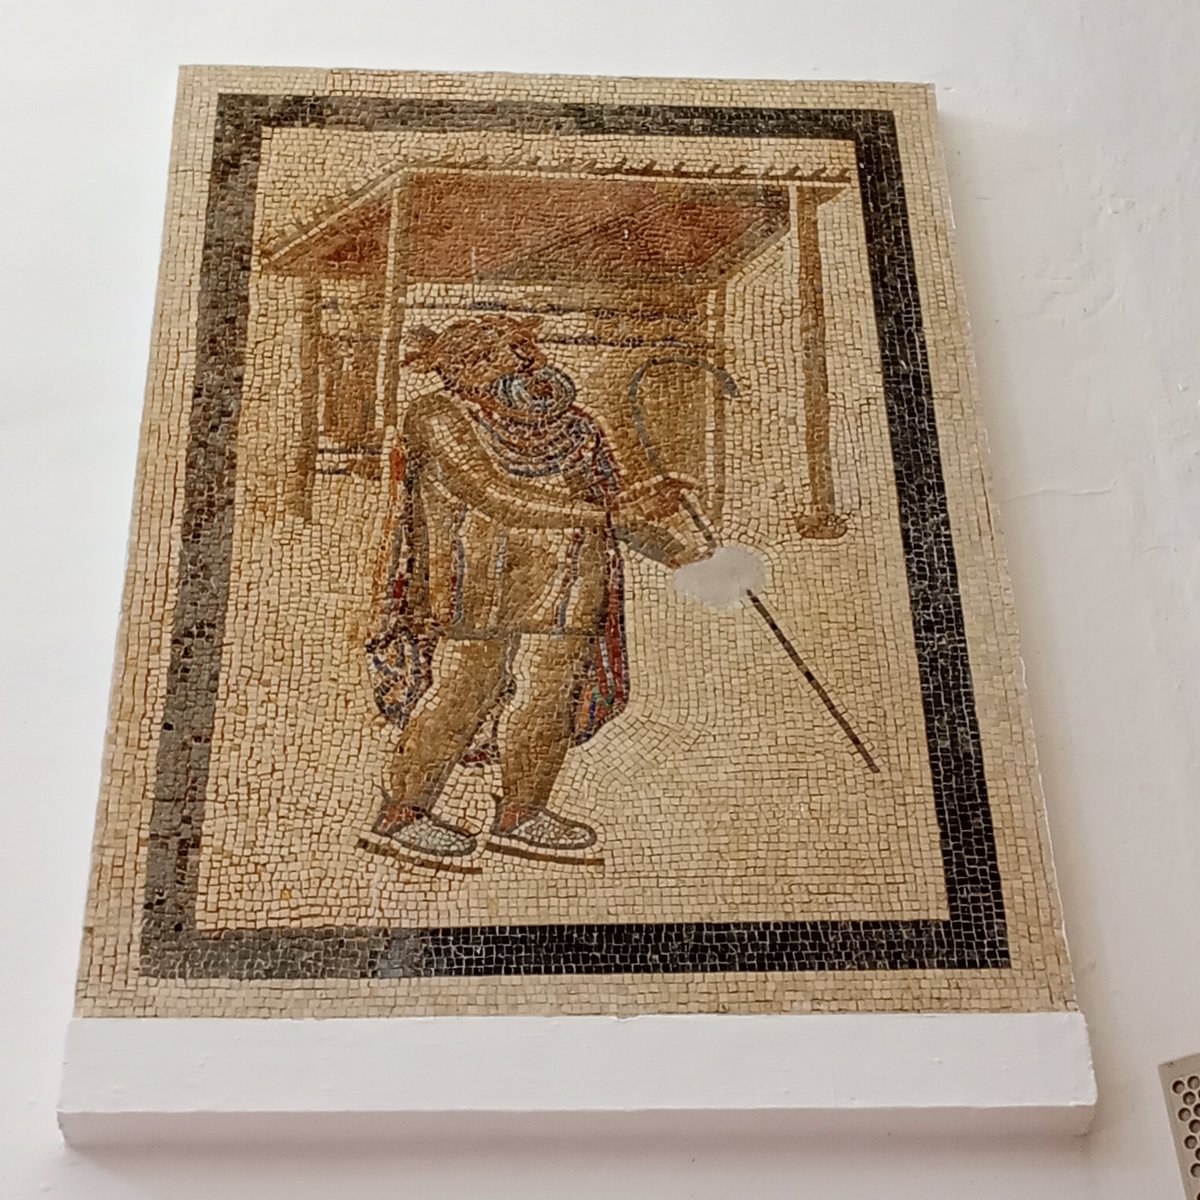 Let's take a look at this actor, playing the character of a blind old man, likely in an Oedipus' play. It once decorated the pavement of a rich theatre aficionado's house in Corduba, which had the largest theatre in the empire only after Rome's. 
Because today it's #MosaicMonday.